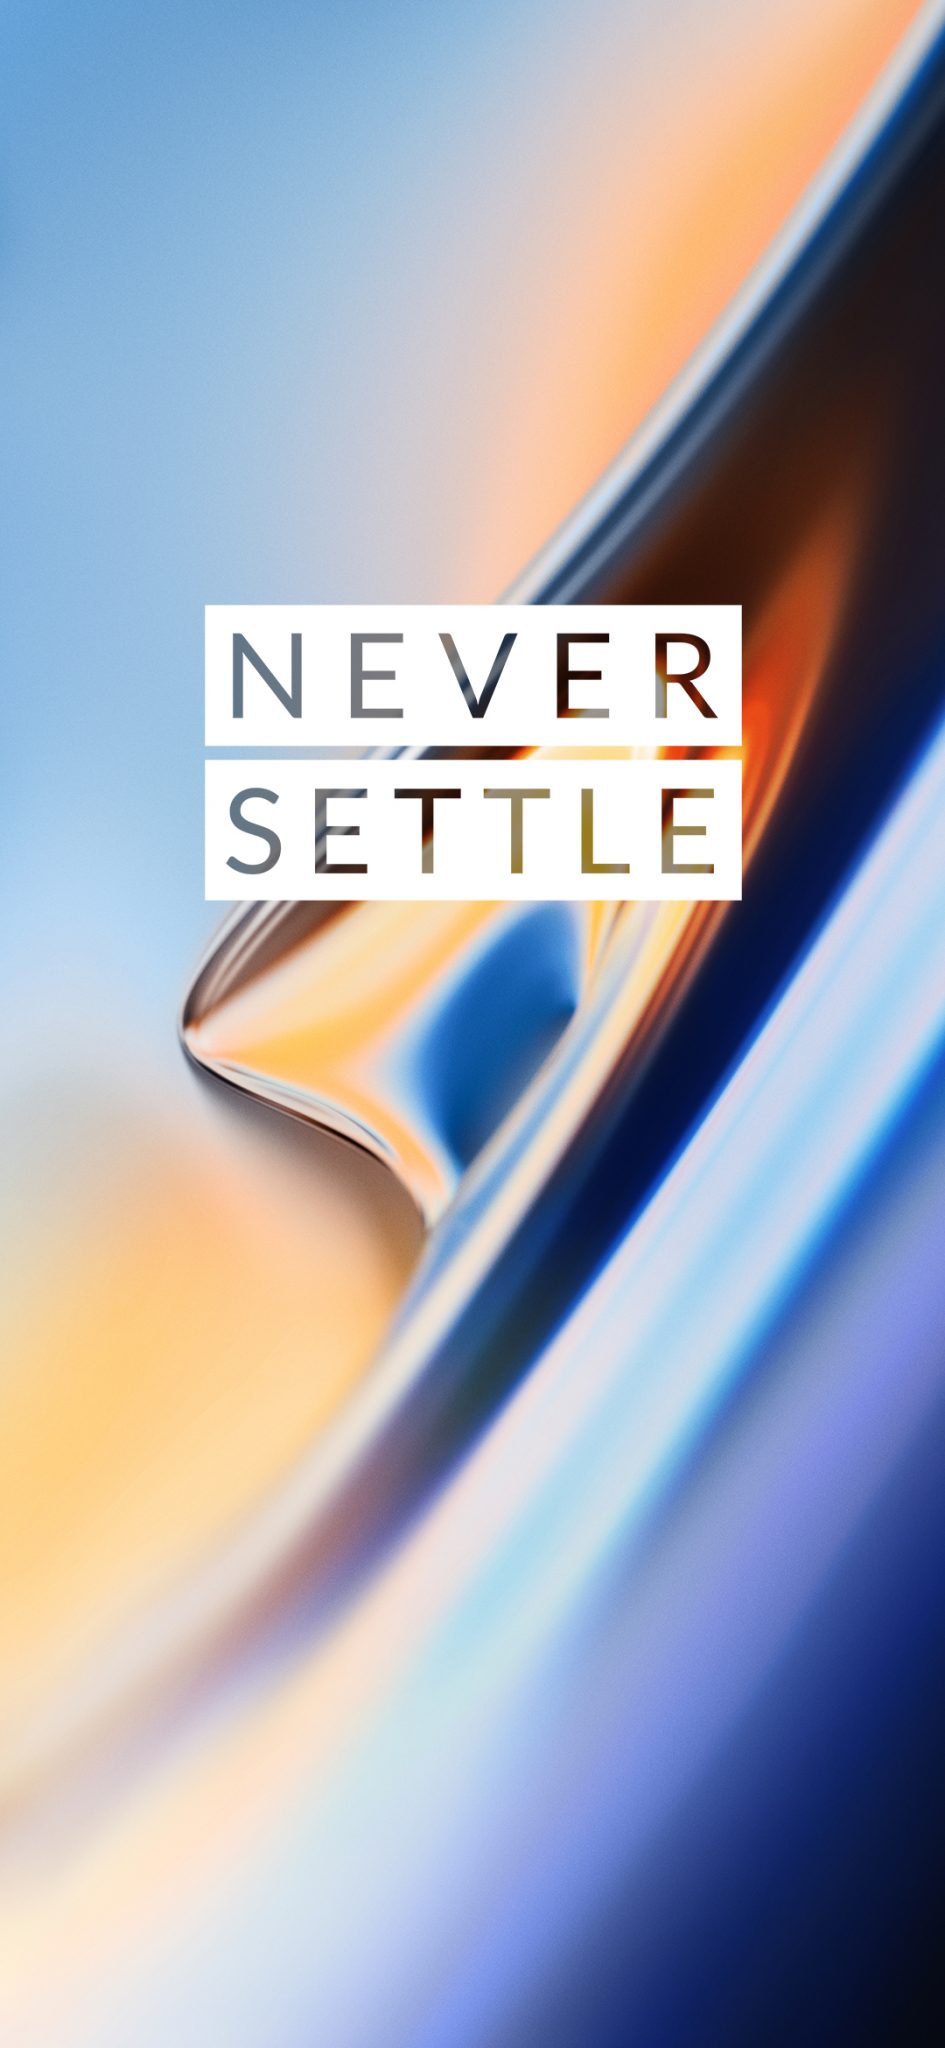 Never Settle wallpaper by Xwalls - Download on ZEDGE™ | c382